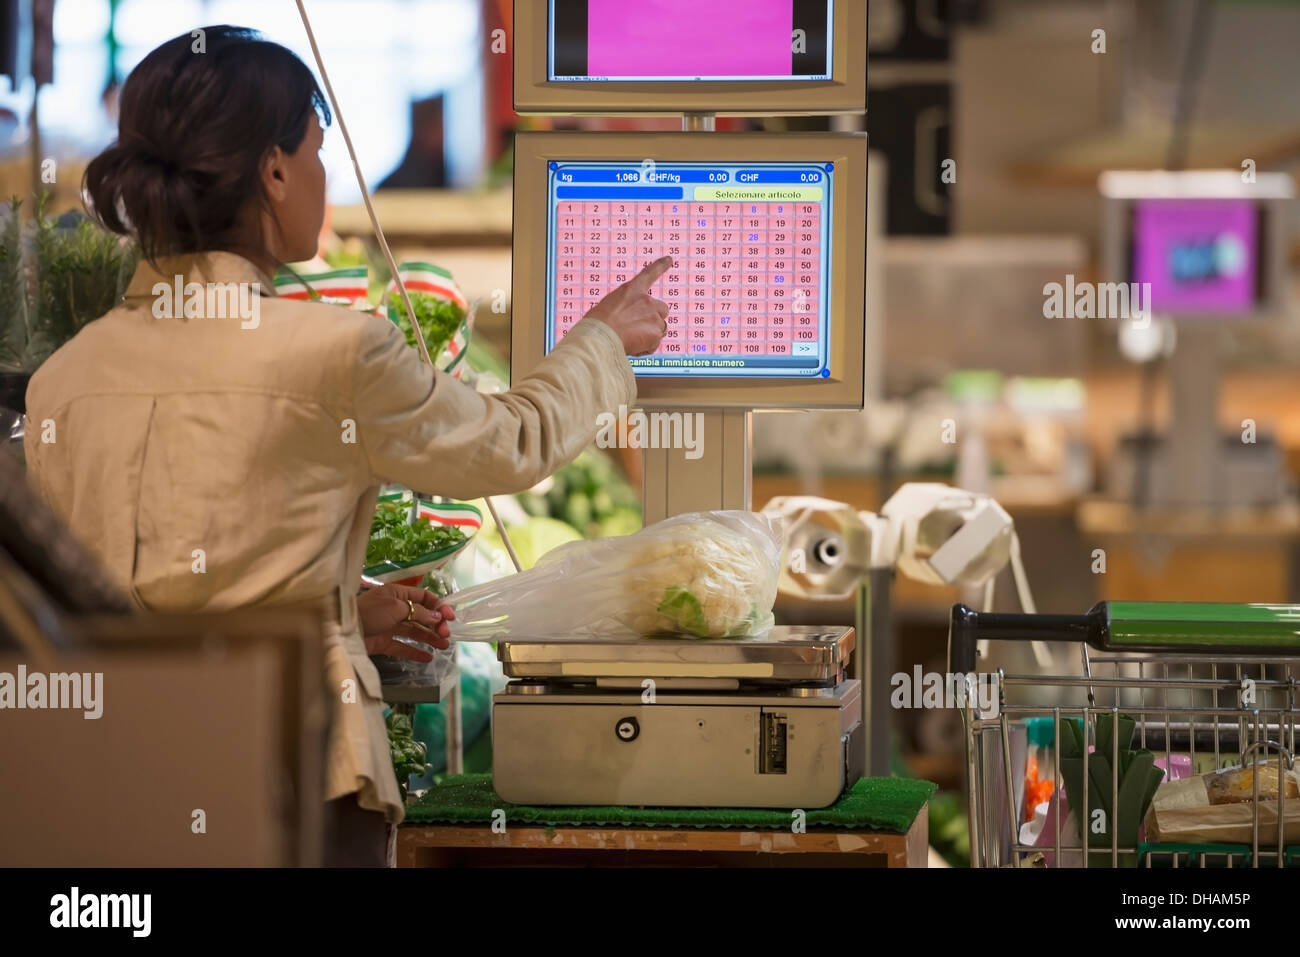 A Cashier Weighs Fresh Produce On A Scale And Chooses A Button On The Screen At Checkout; Ascona, Ticino, Switzerland Stock Photo